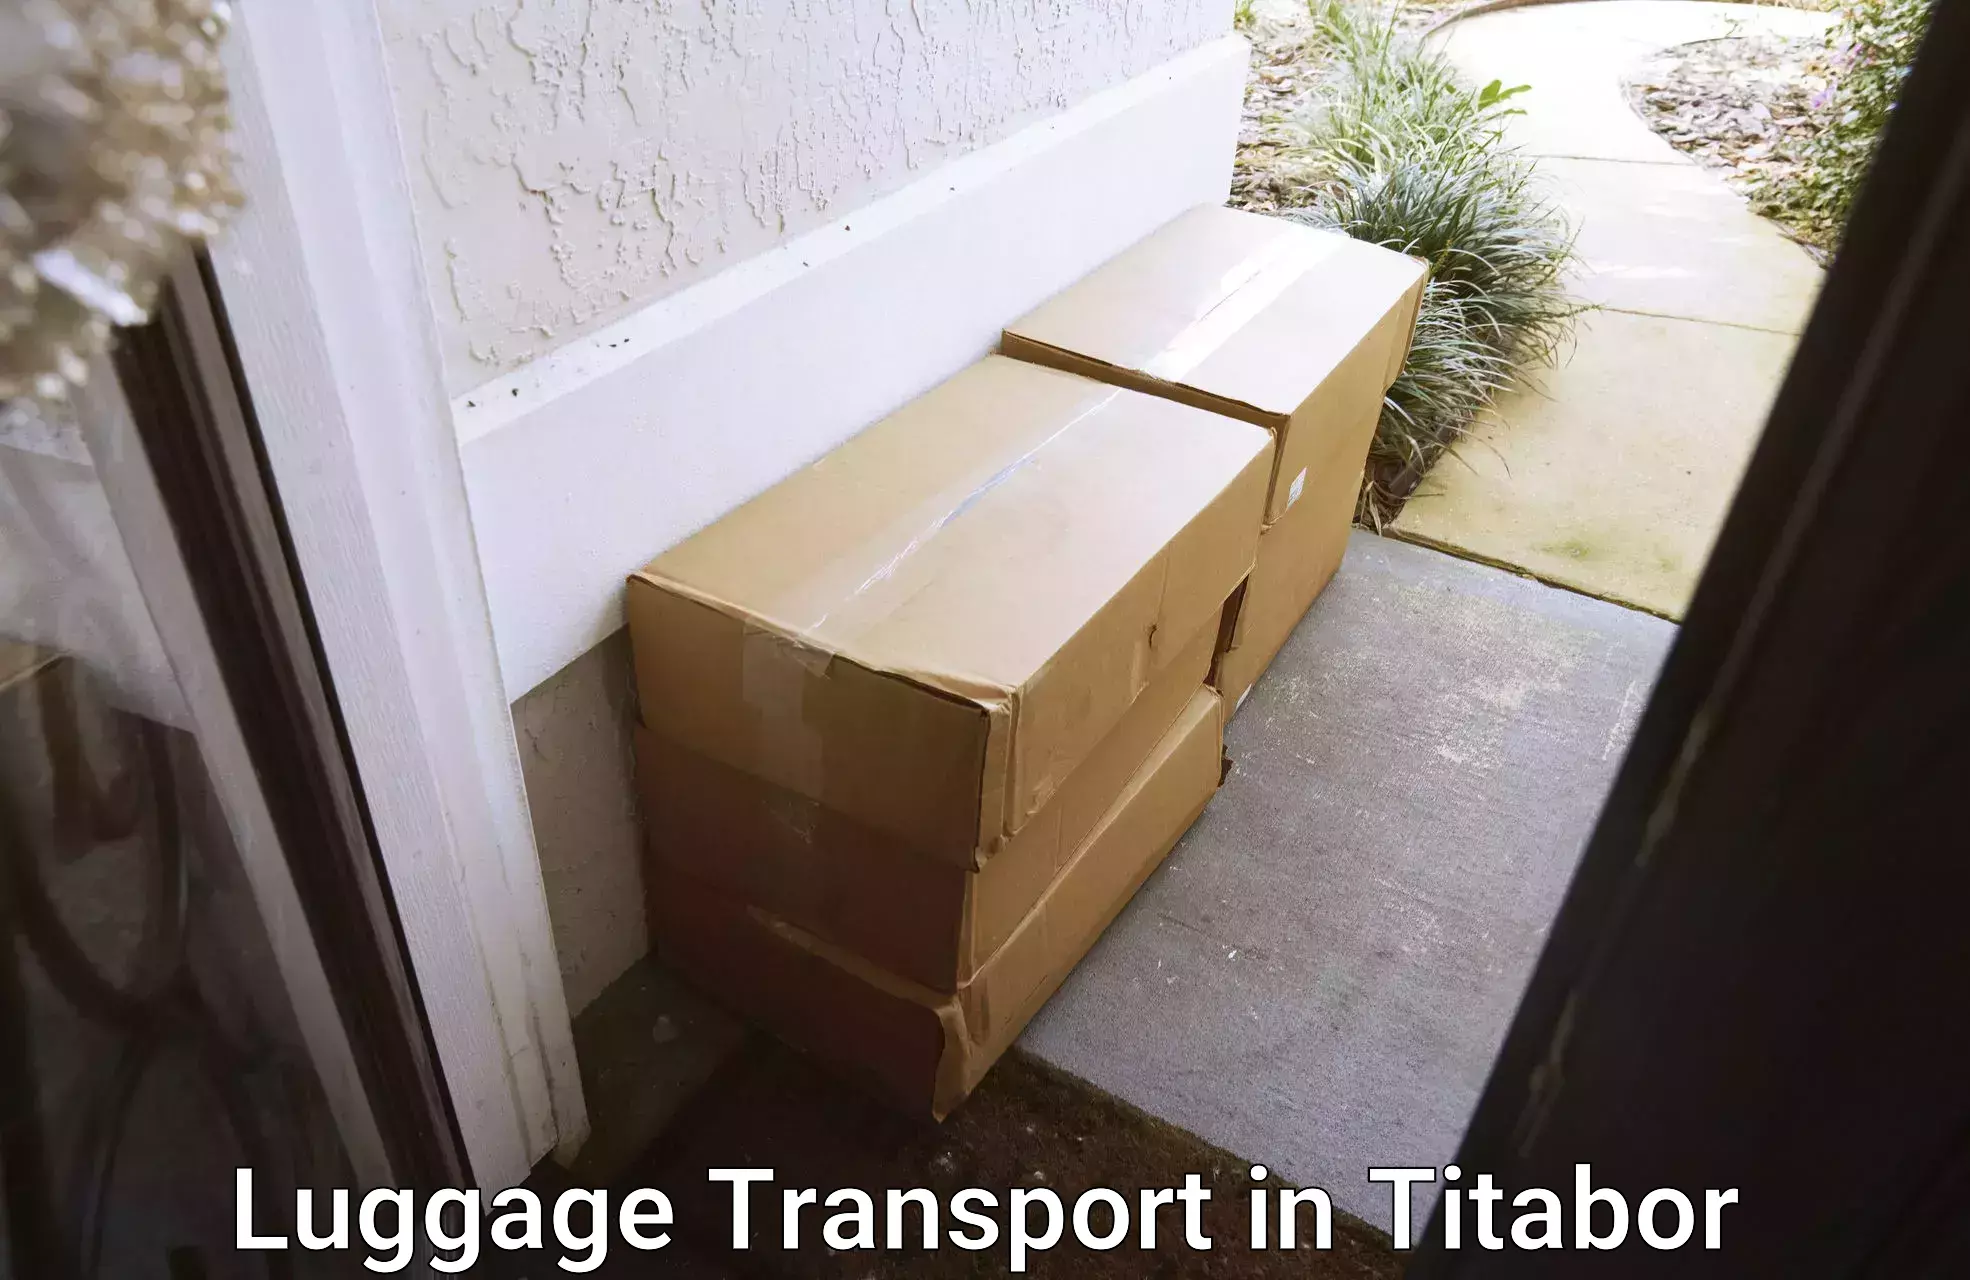 Luggage shipping consultation in Titabor